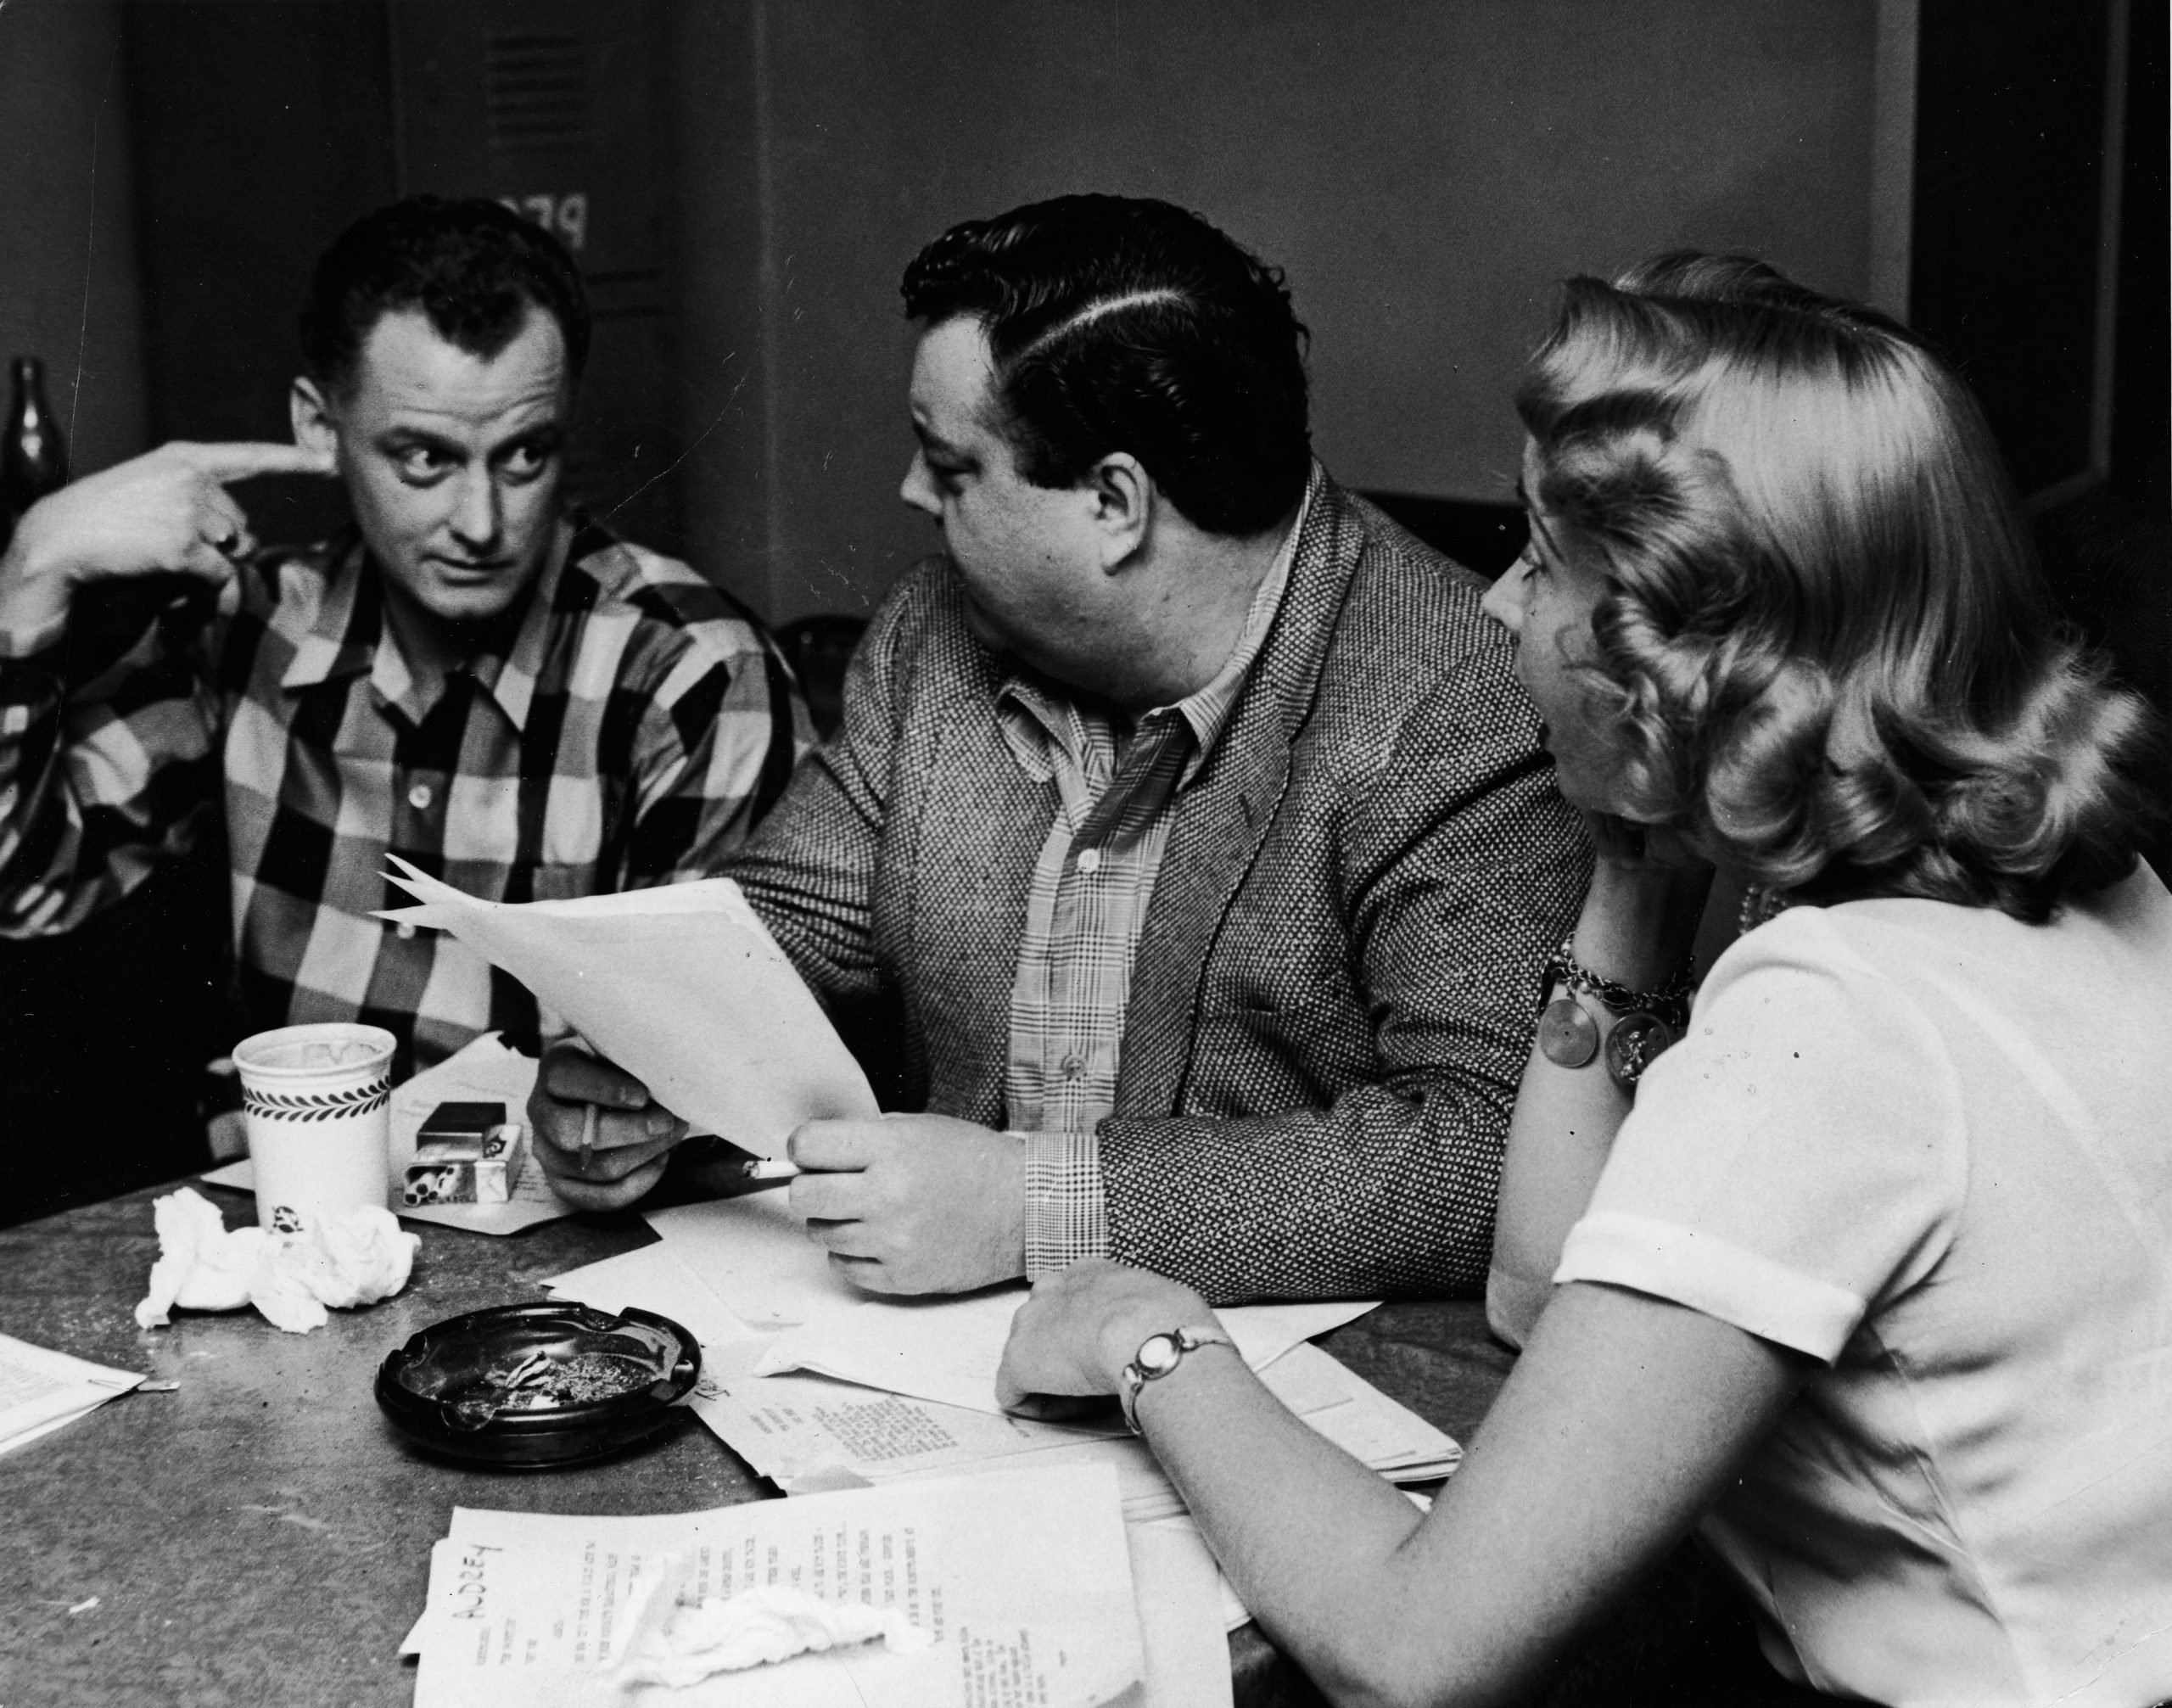 Art Carney, Jackie Gleason, and Audrey Meadows rehearsing for 'The Honeymooners', 1956